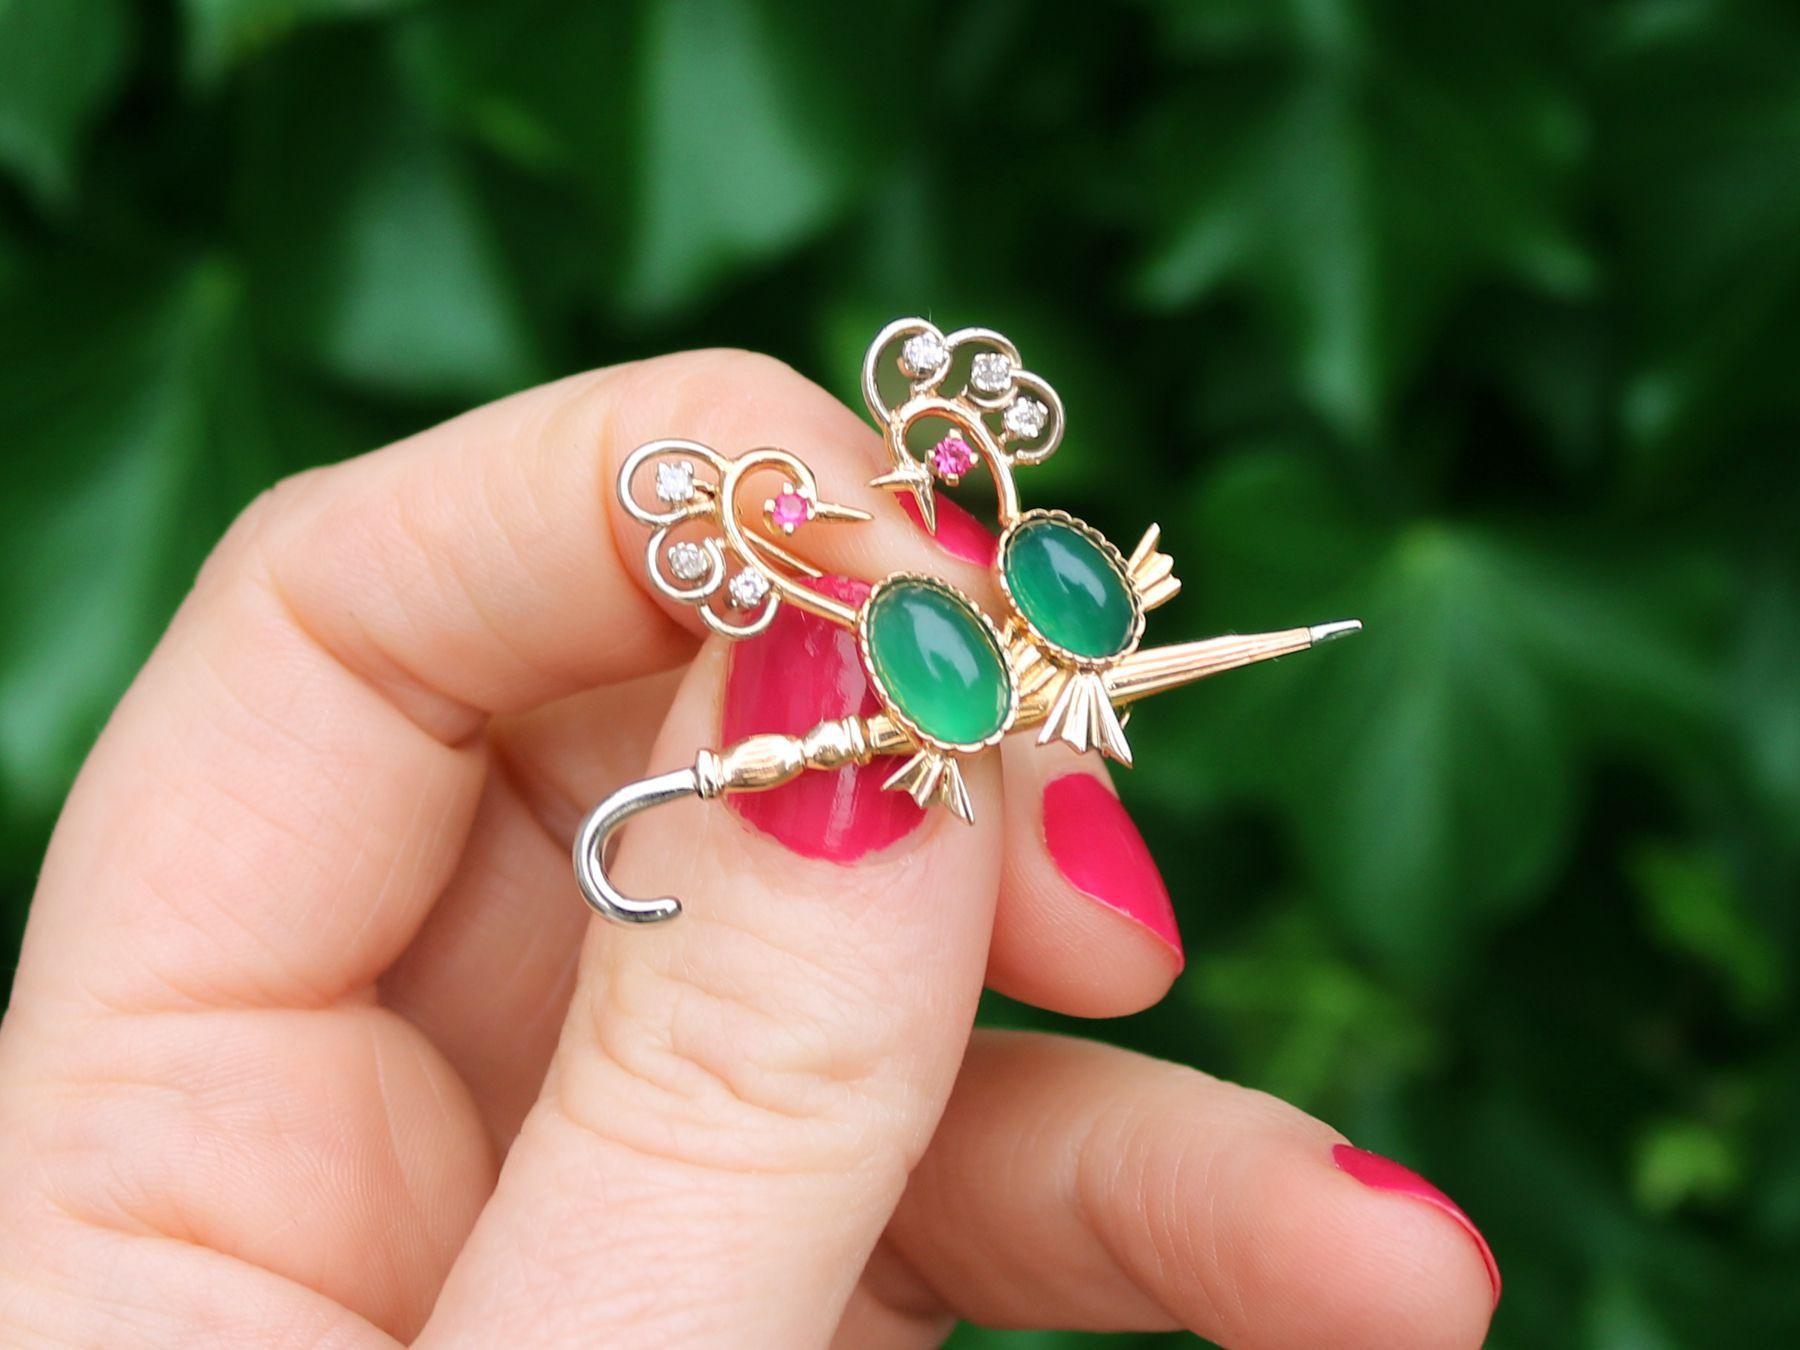 A fine and impressive vintage French 2.71 carat chrysoprase, 0.16 carat diamond and 0.07 carat ruby, 18 karat yellow gold bird brooch; part of our diverse gemstone jewellery collections.

This fine and impressive gemstone brooch has been crafted in